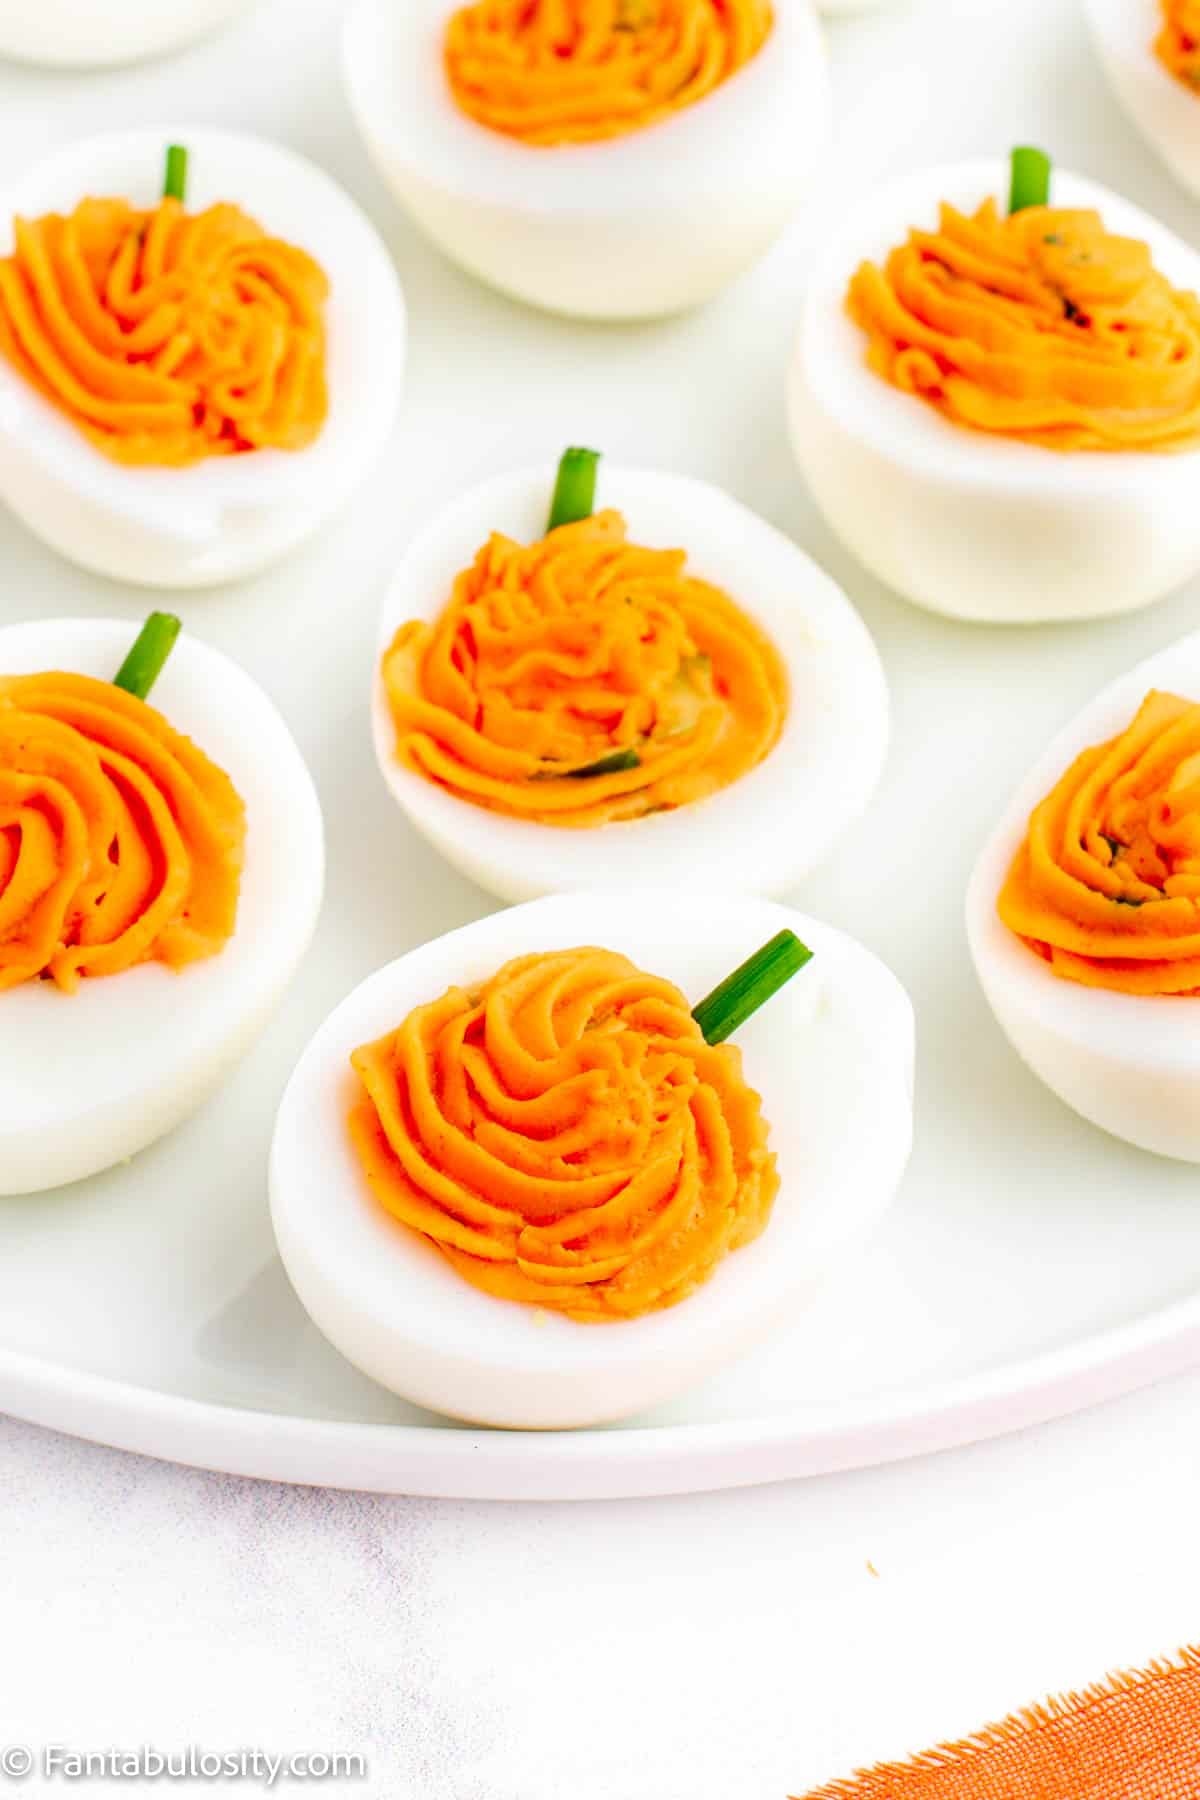 A close up of halved hard boiled eggs filled with orange yolk filling and snipped chives inserted as stems to look like pumpkins